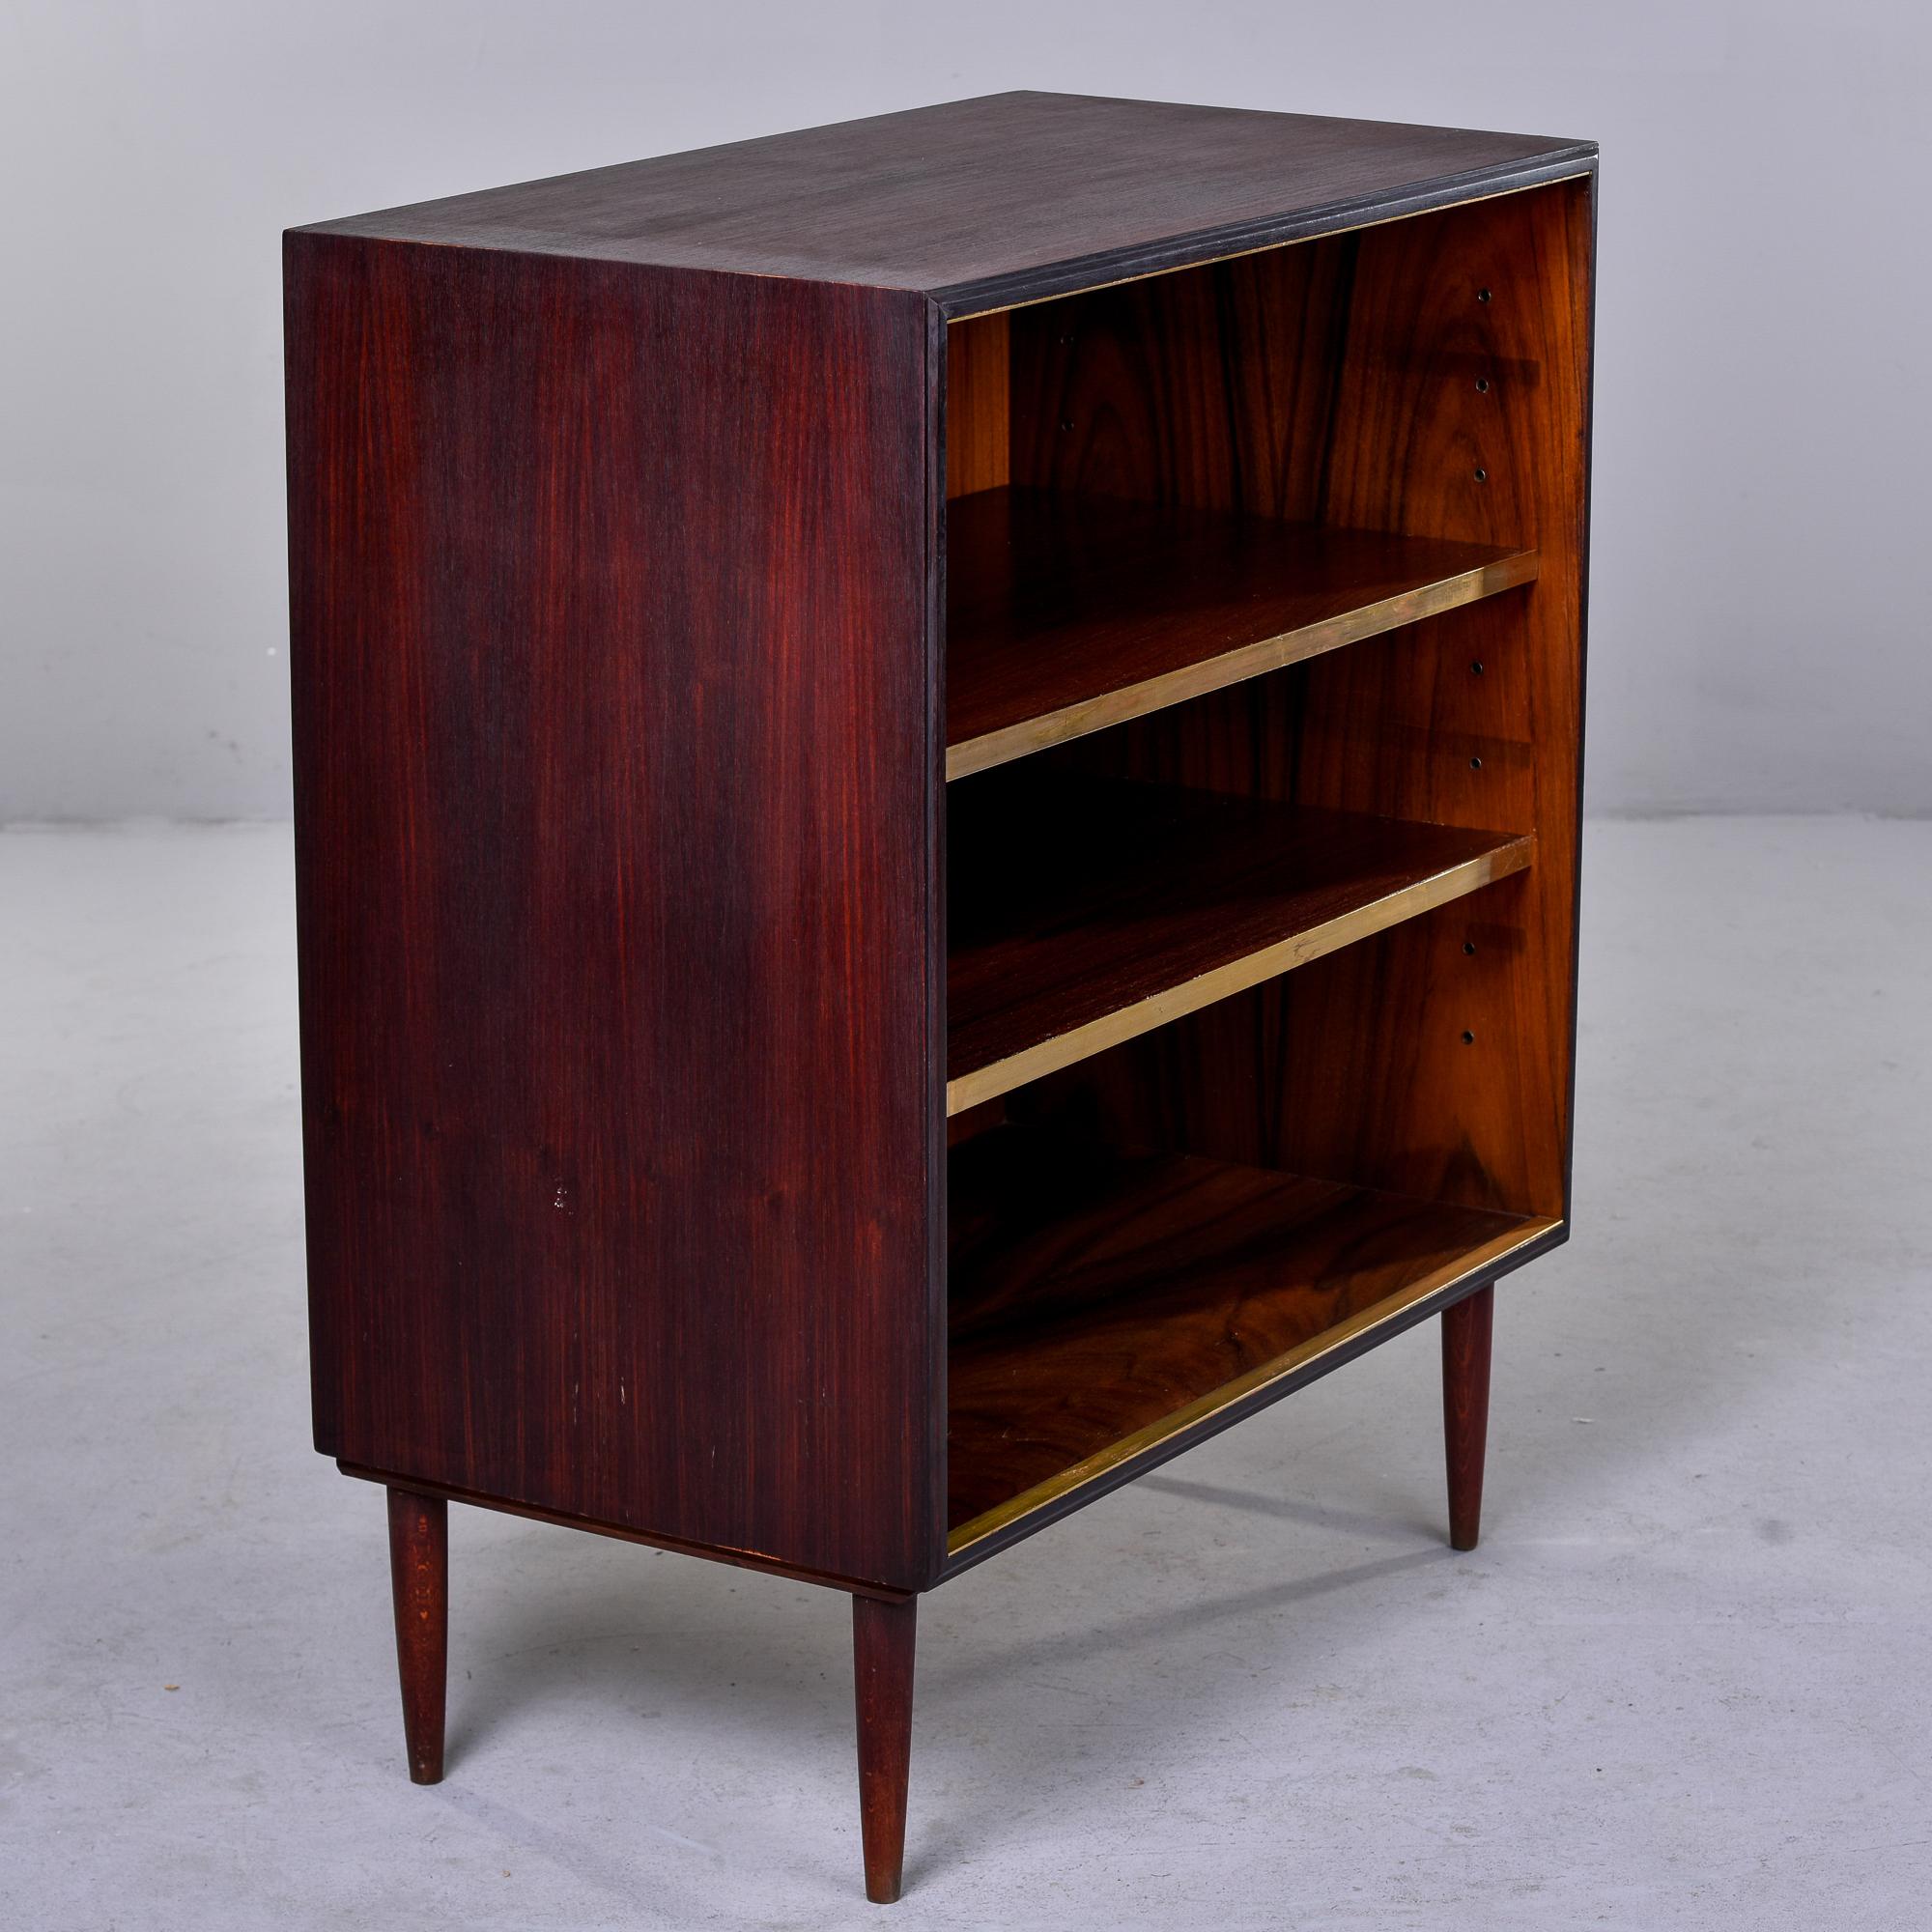 Italian Mid-Century Modern Mahogany Shelf Unit with Brass Edges In Good Condition For Sale In Troy, MI